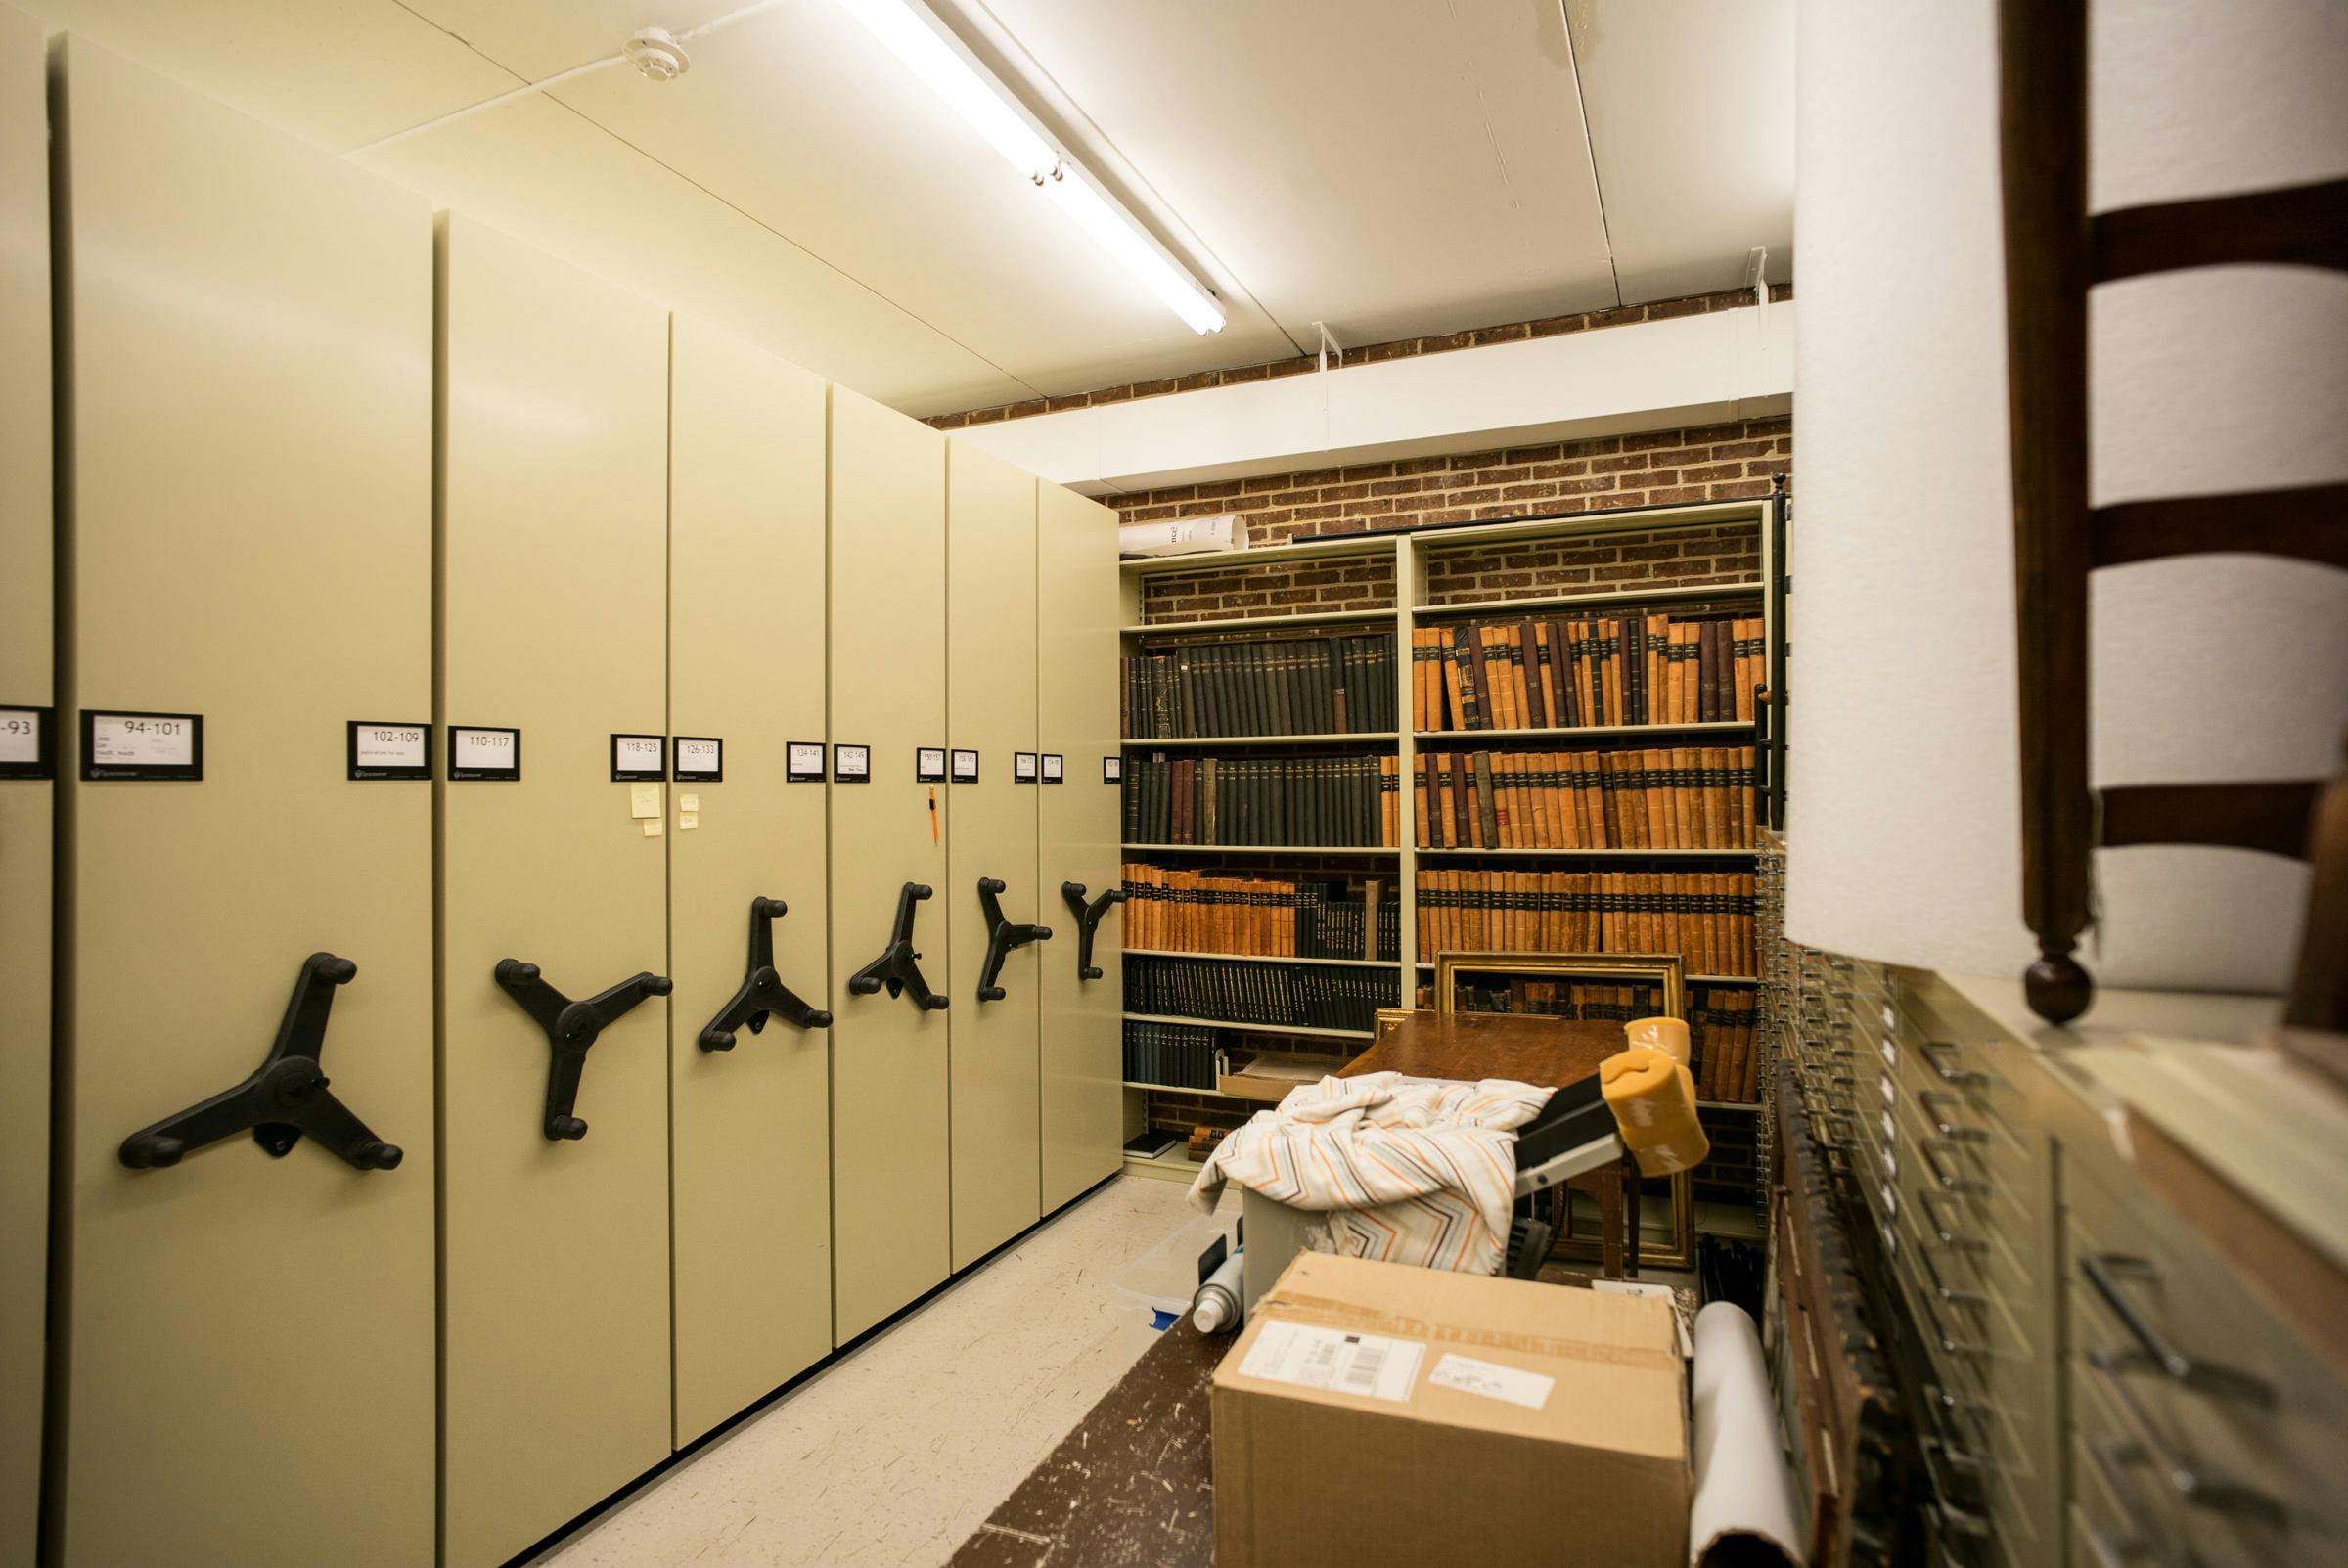 Location photography for Moravian Archives